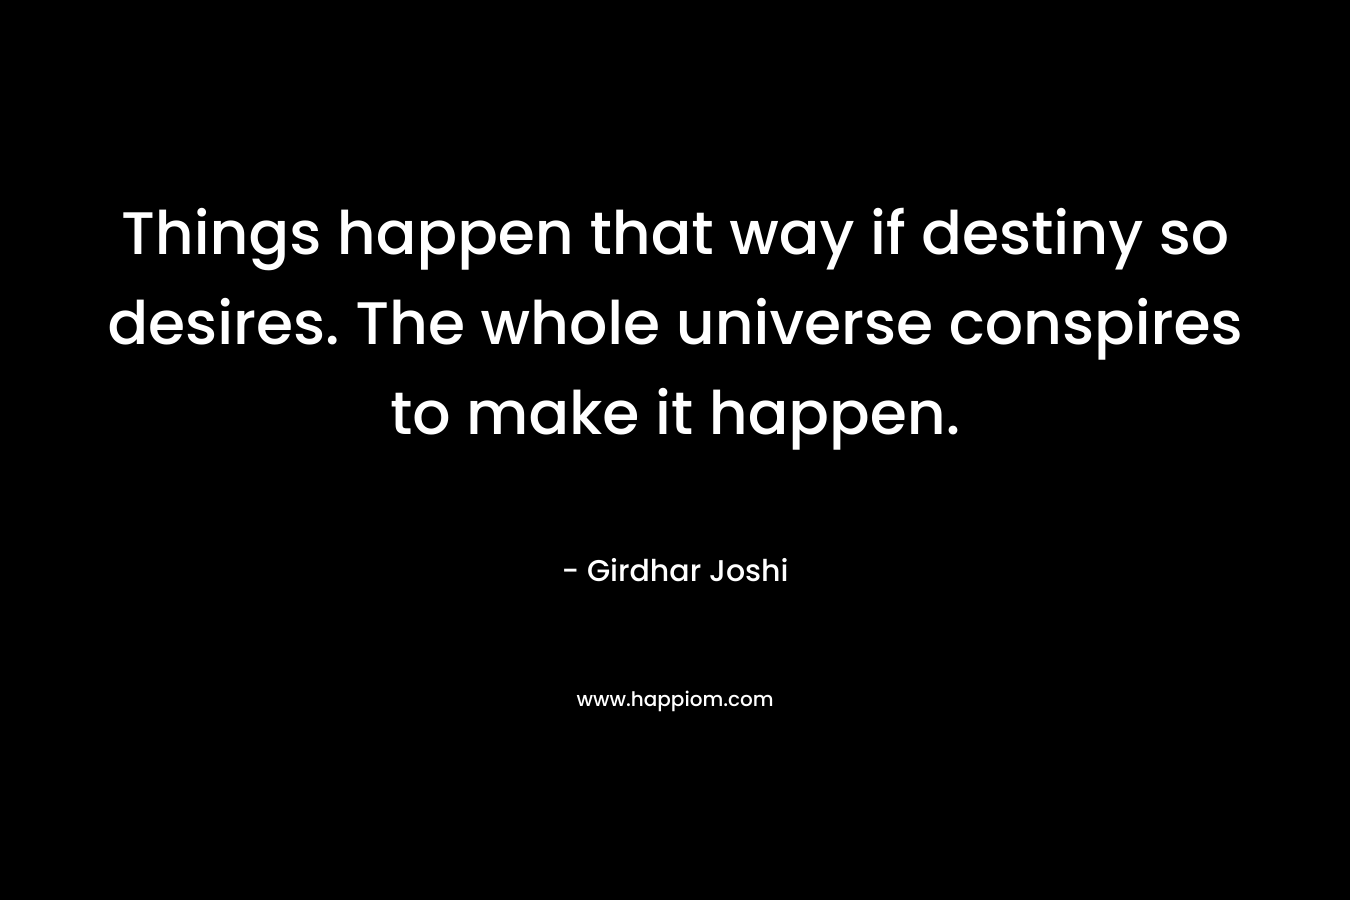 Things happen that way if destiny so desires. The whole universe conspires to make it happen.